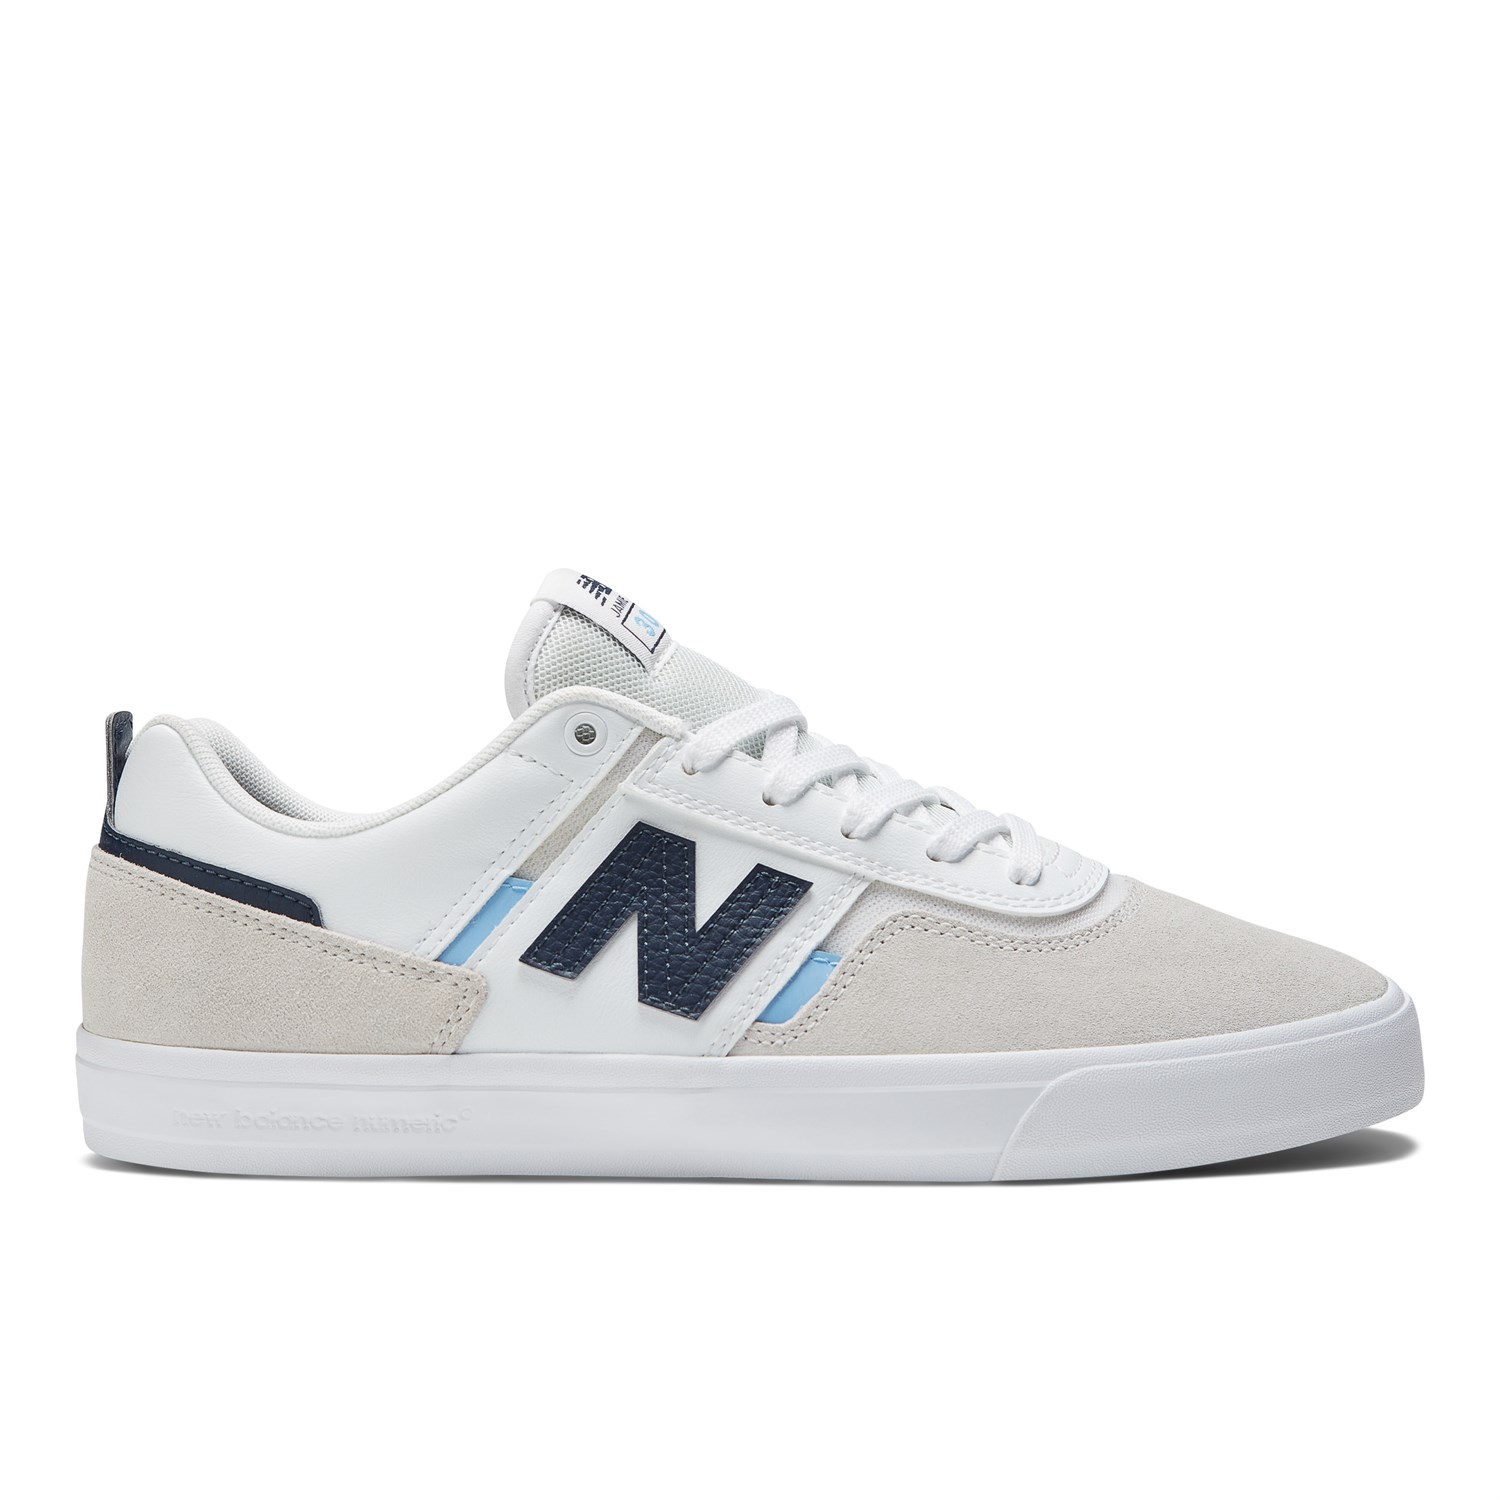 New Balance Numeric 306 Shoes Evo | vlr.eng.br